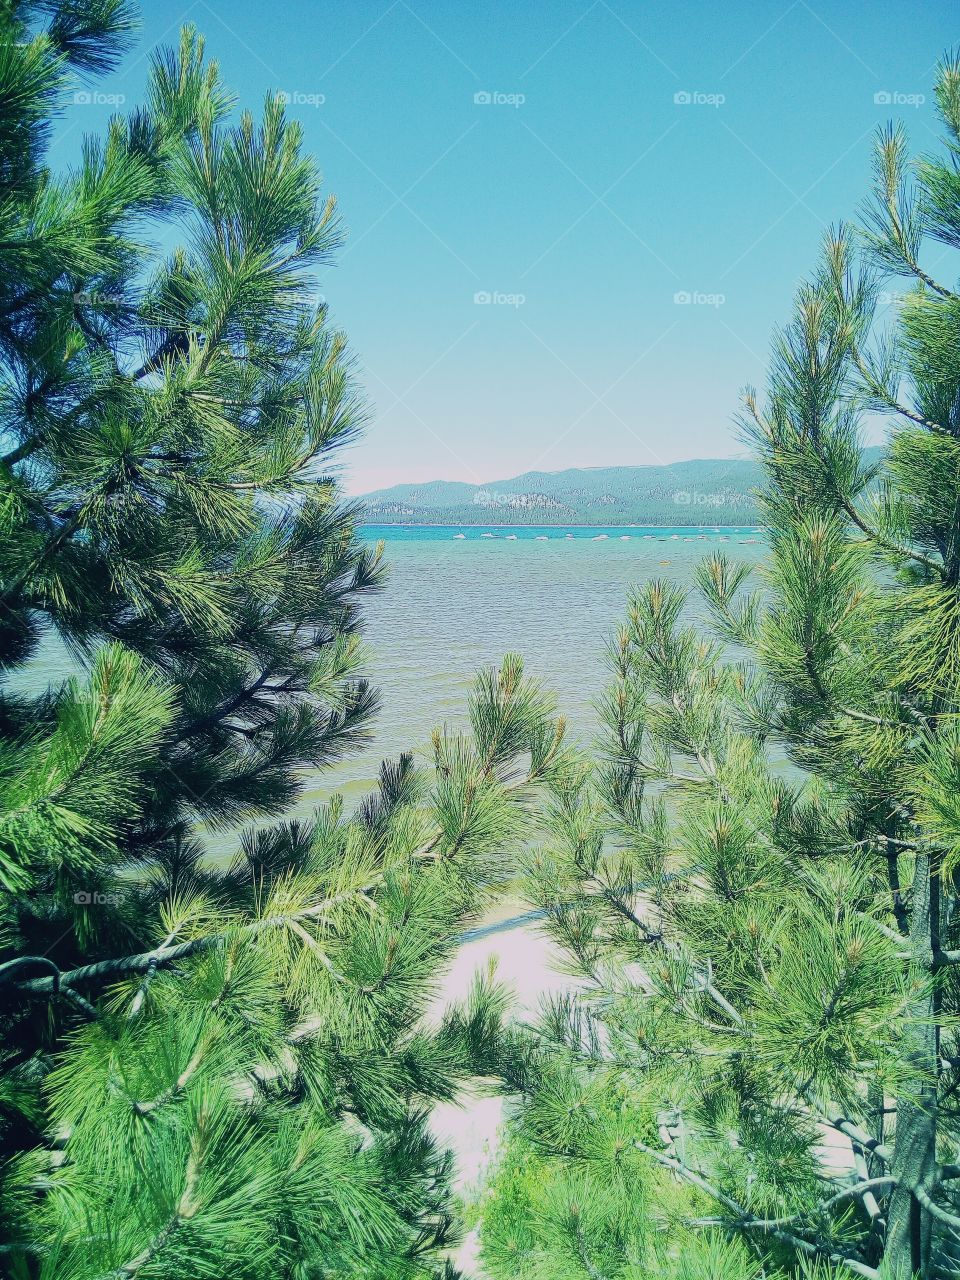 A peek from behind the pine trees , that shows the Beautiful Waters and Mountains In South Lake Tahoe.